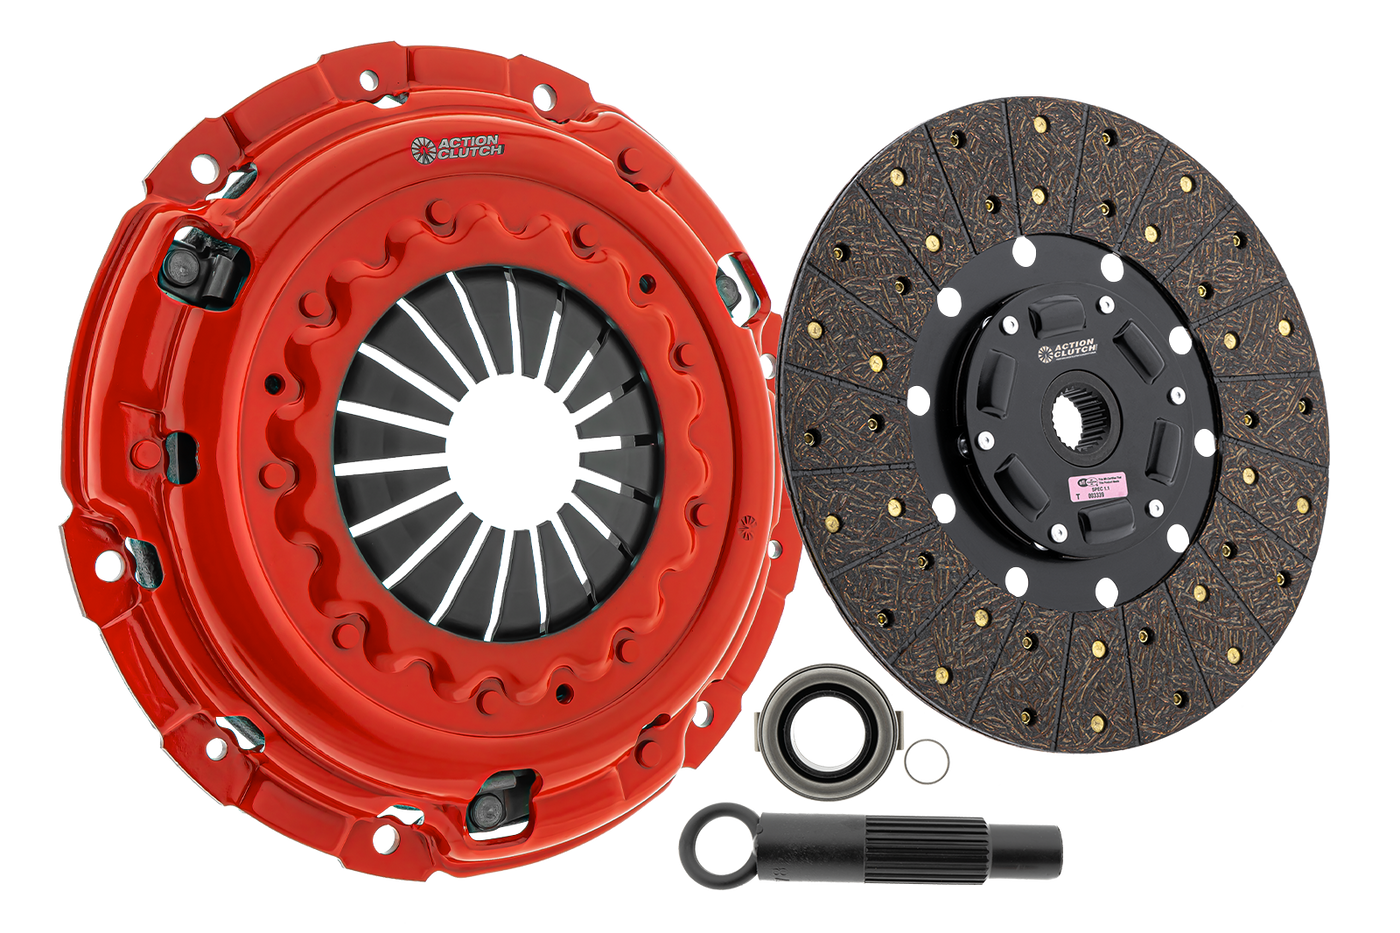 Stage 1 Clutch Kit (1OS) for Scion tC 2011-2016 2.5L (2AR-FE) Includes Heavy Duty Slave Cylinder